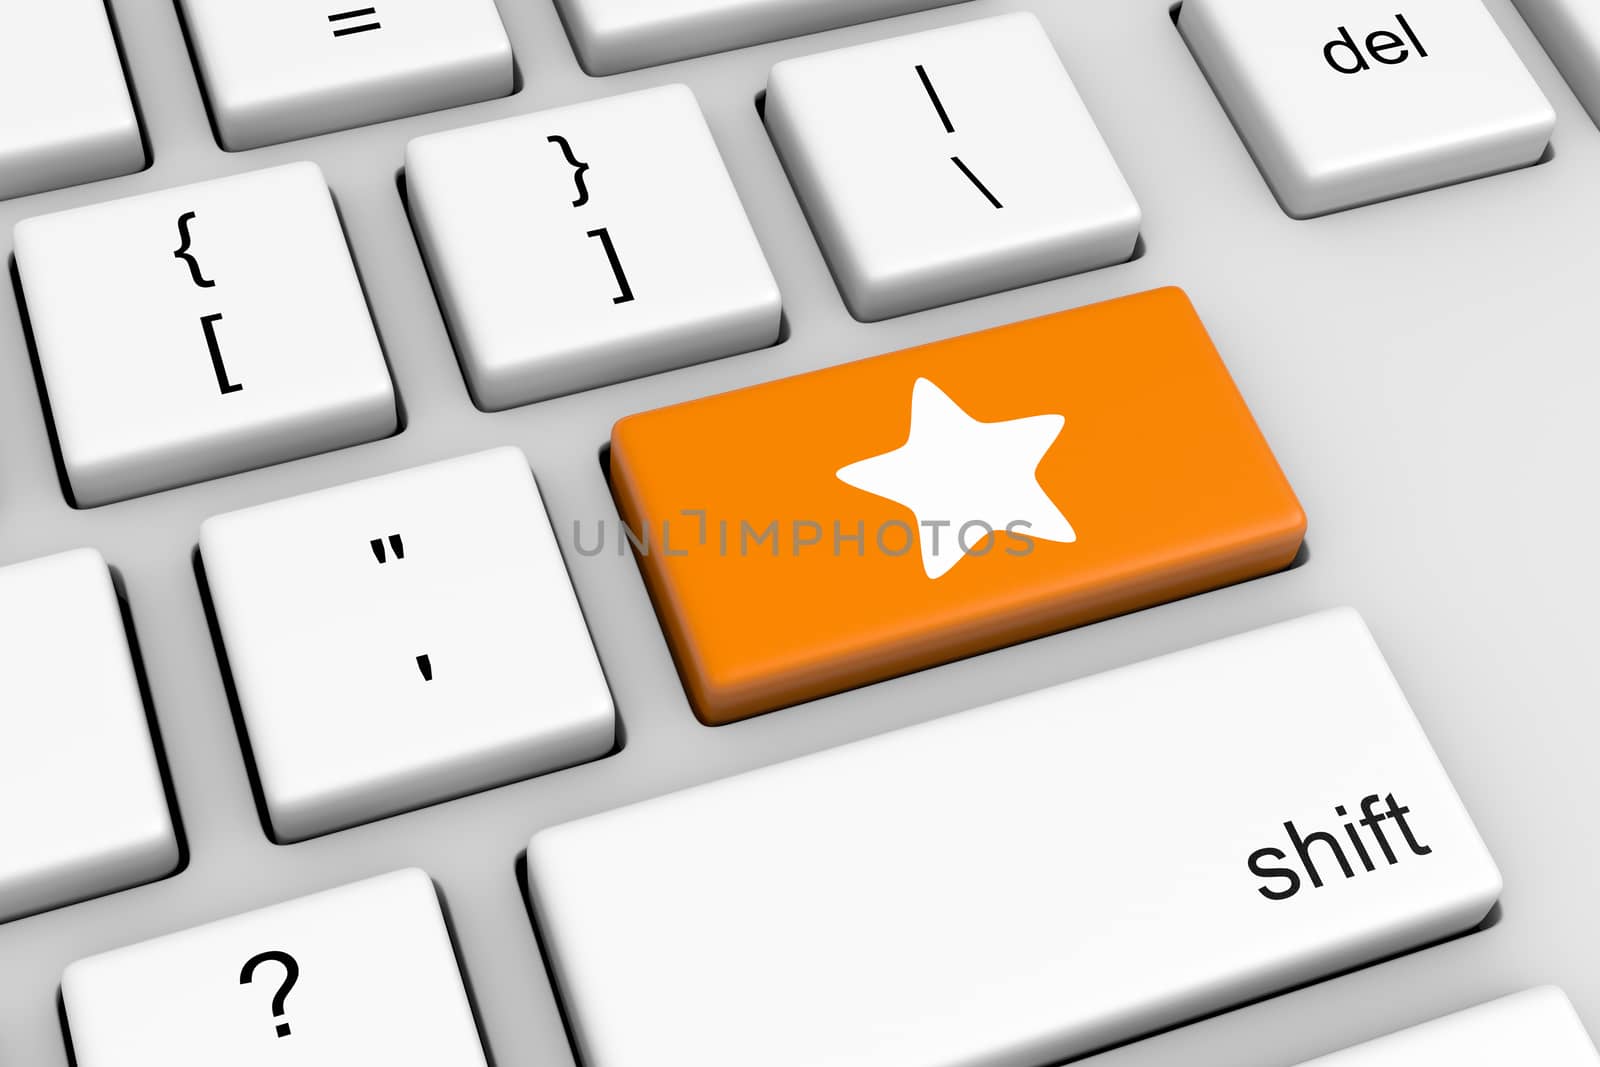 Computer Keyboard with Orange Star Rating Button Illustration